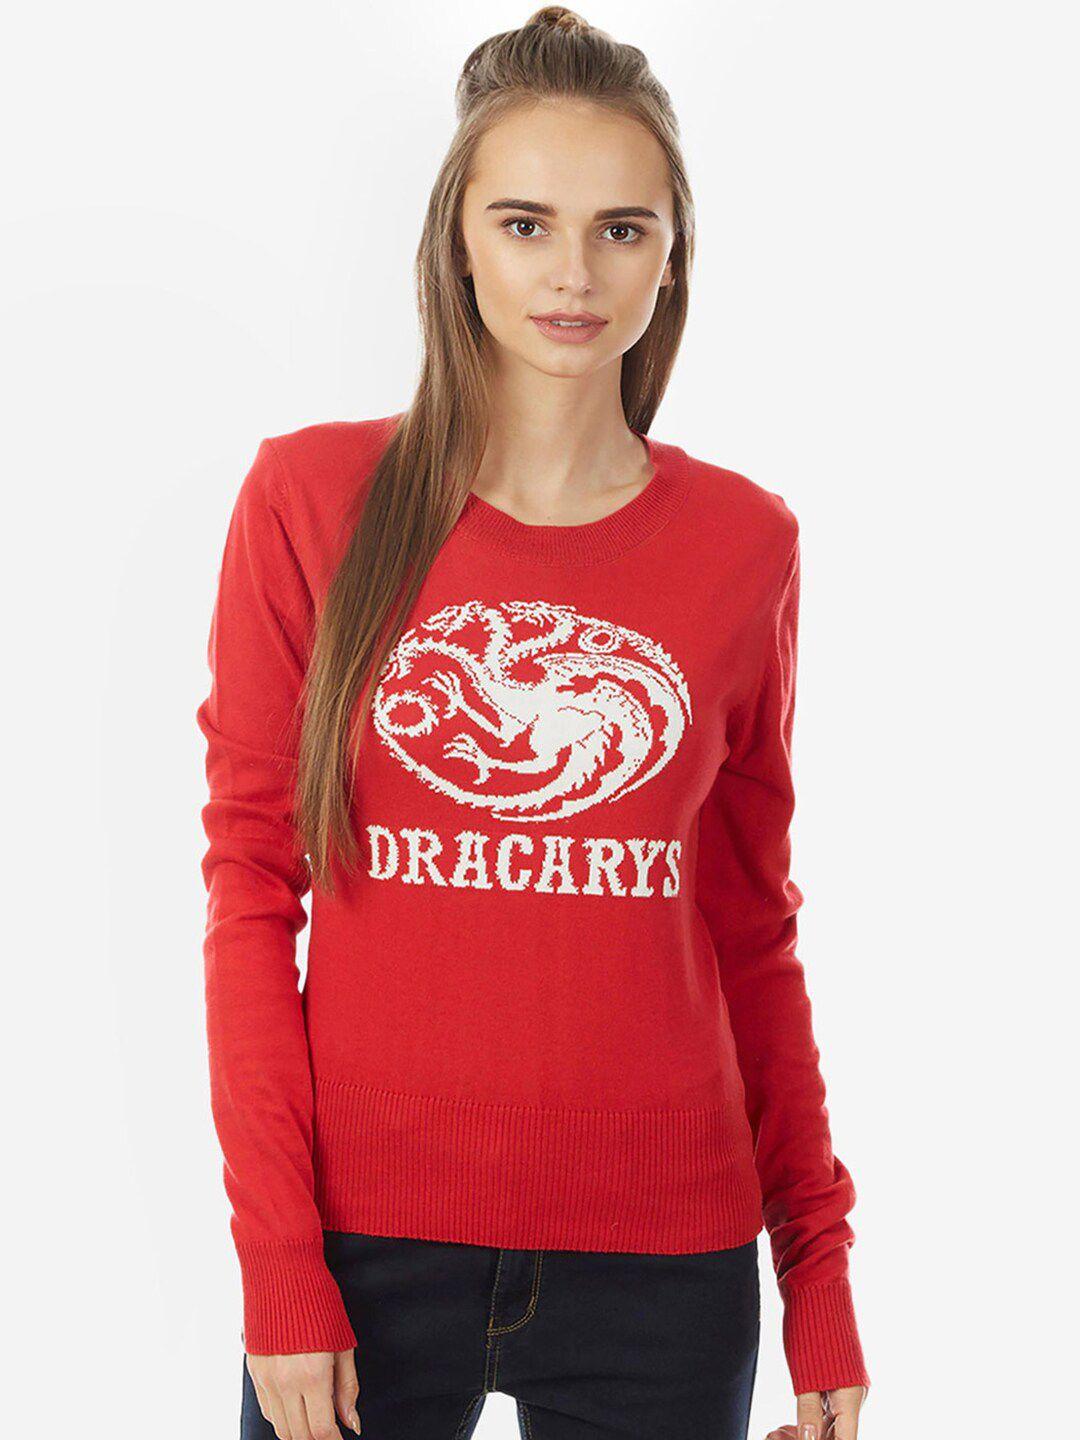 free authority women red & white game of thrones printed cotton pullover